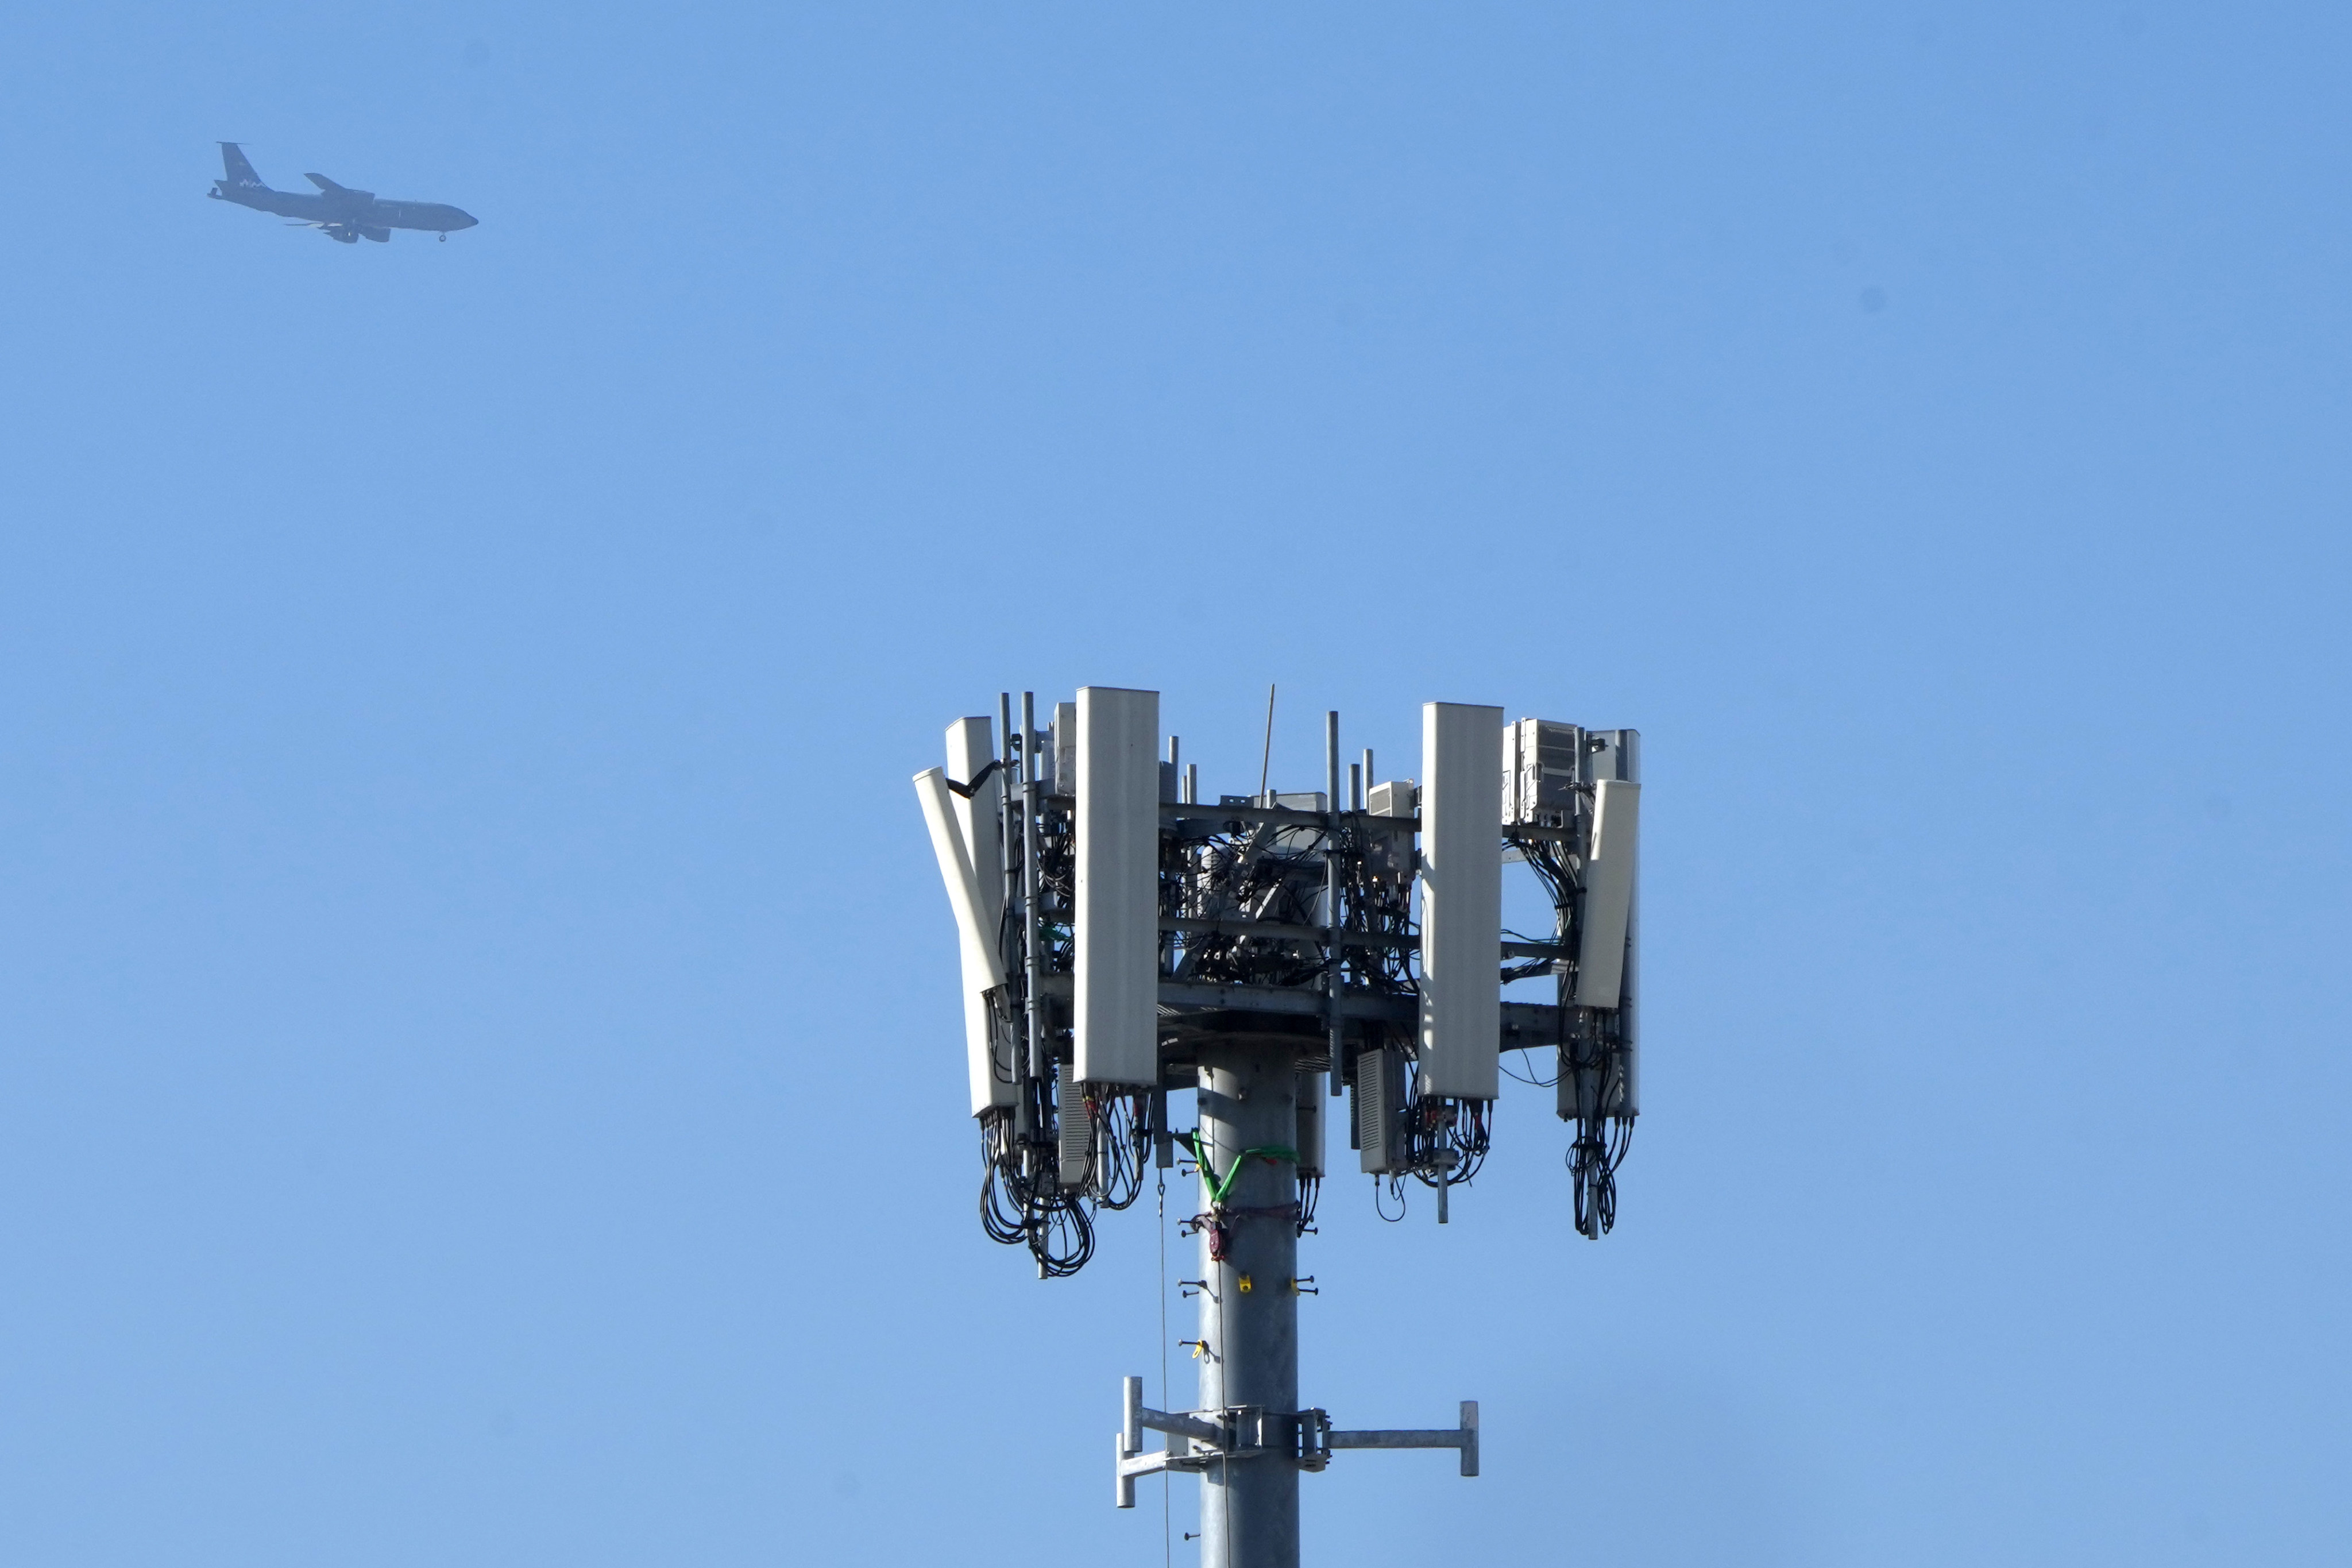 A 5G cell tower in the US state of Utah is seen in this file photo from January 11, 2022. Photo: Bloomberg